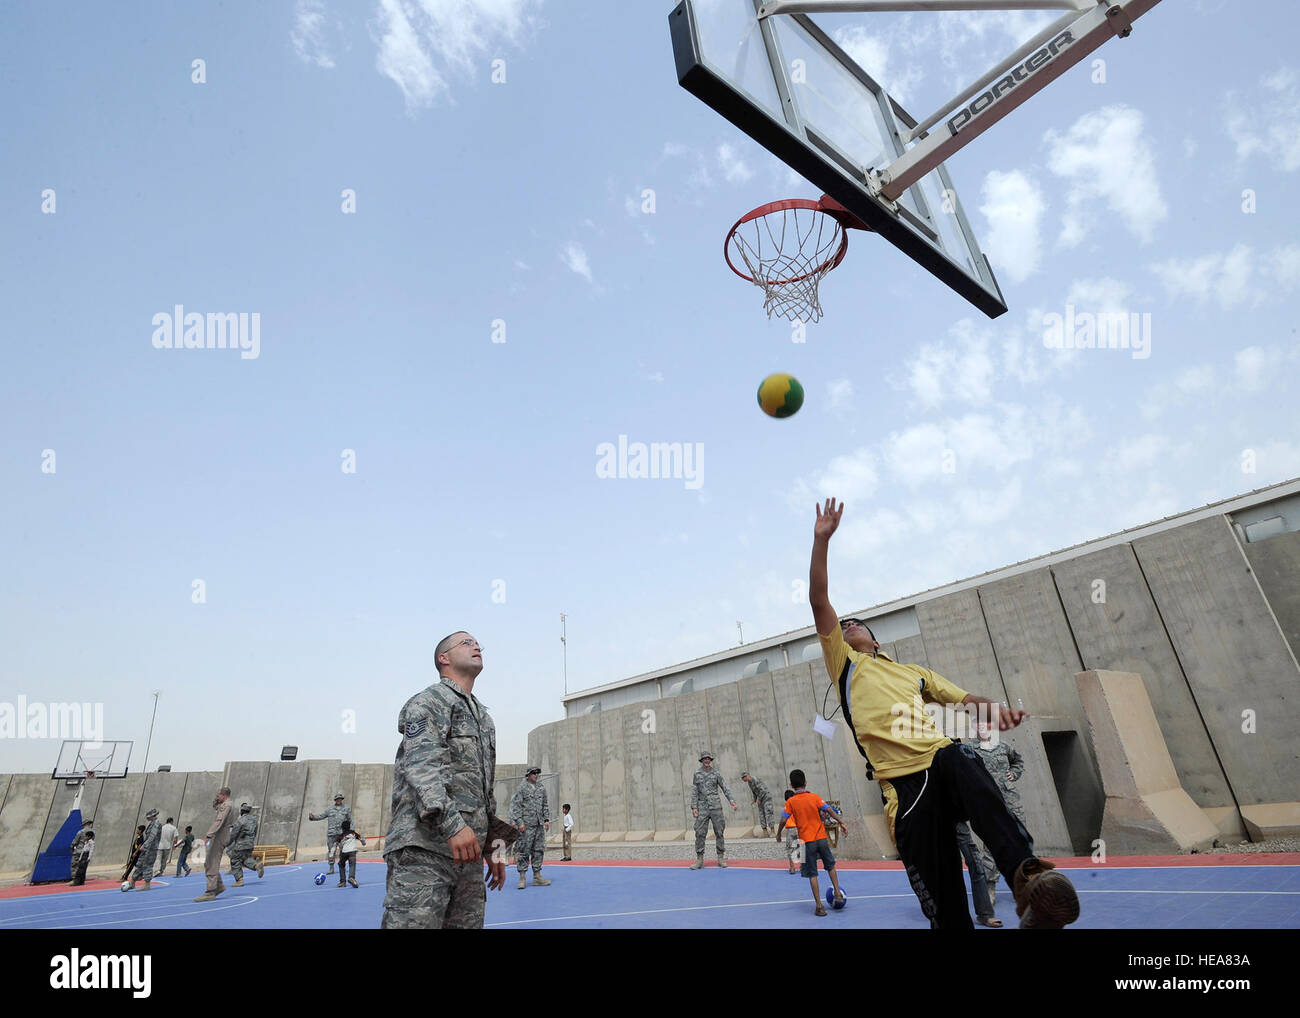 Technical Sgt. Coda Whitehead, 332nd Expeditionary Maintenance Squadron, plays basketball with an Iraqi boy during Iraqi Kids Day at Joint Base Balad, Iraq, June 19. Whitehead volunteered as a mentor for the event. Iraqi Kids Day serves as part of the ongoing base effort to spread goodwill to the local community. Over 70 children from local villages were bussed on base to play games, share culture and to have a day of fun. : Senior Airman Matthew Coleman-Foster) Stock Photo